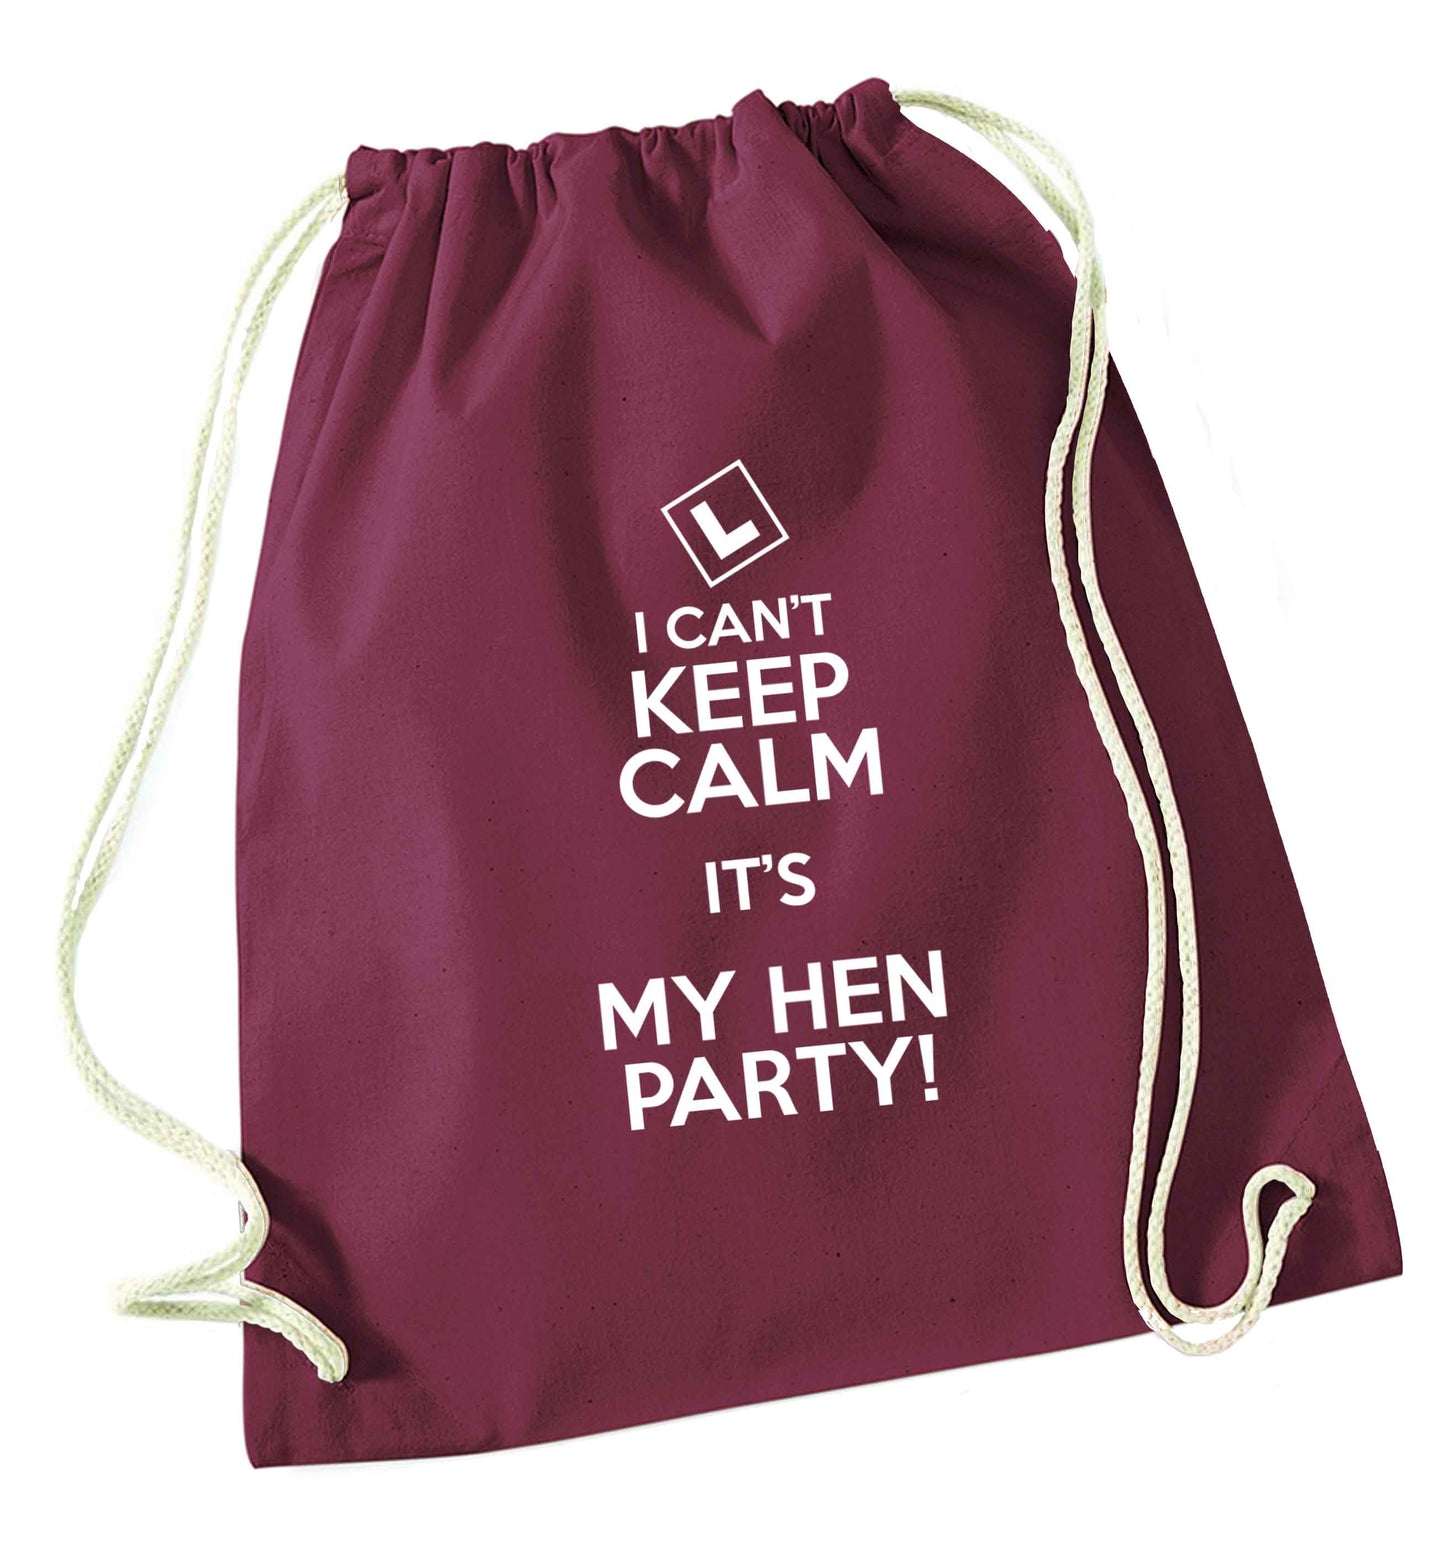 I can't keep calm it's my hen party maroon drawstring bag